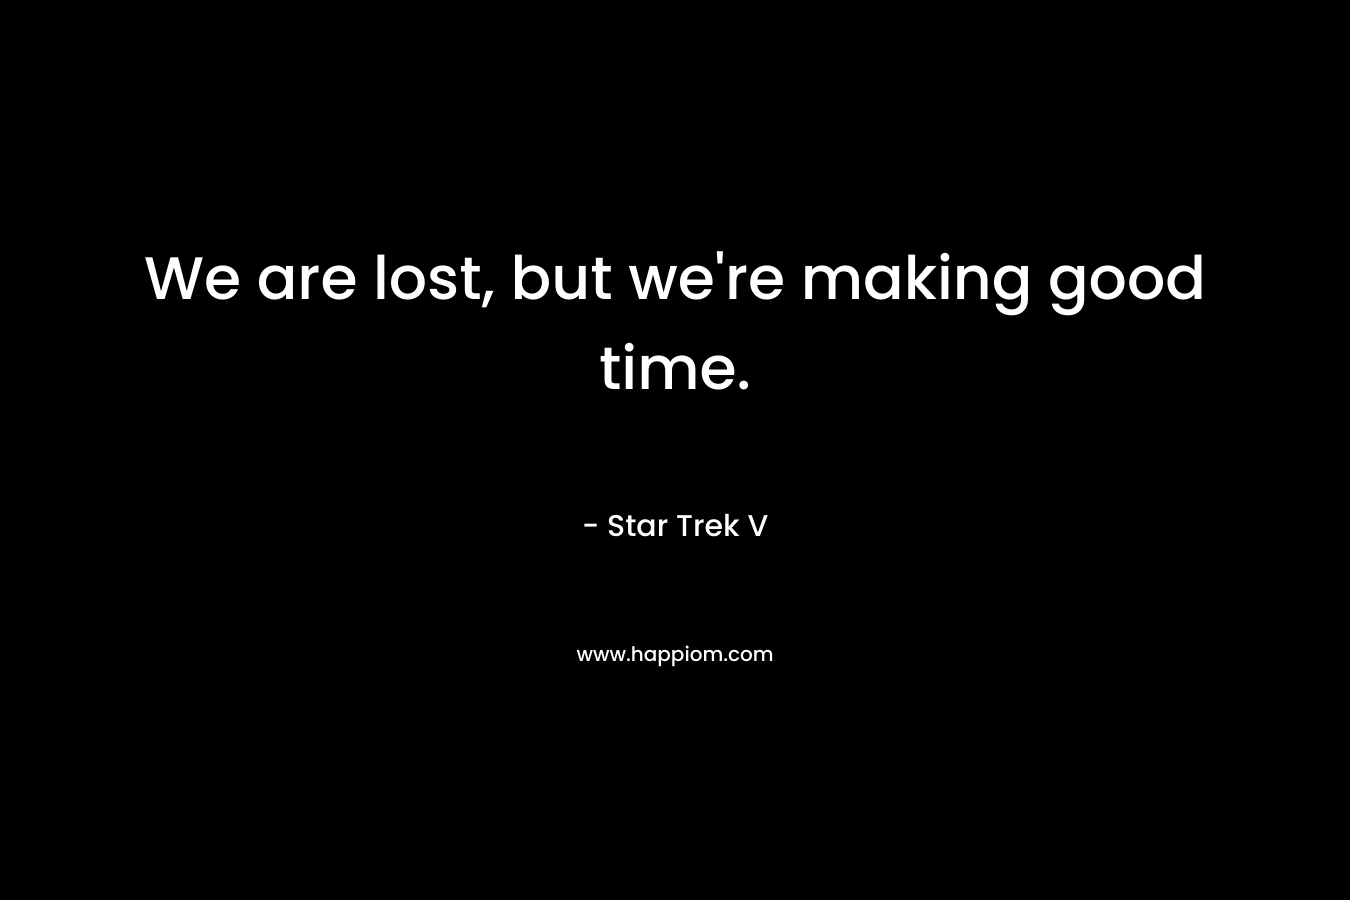 We are lost, but we're making good time.